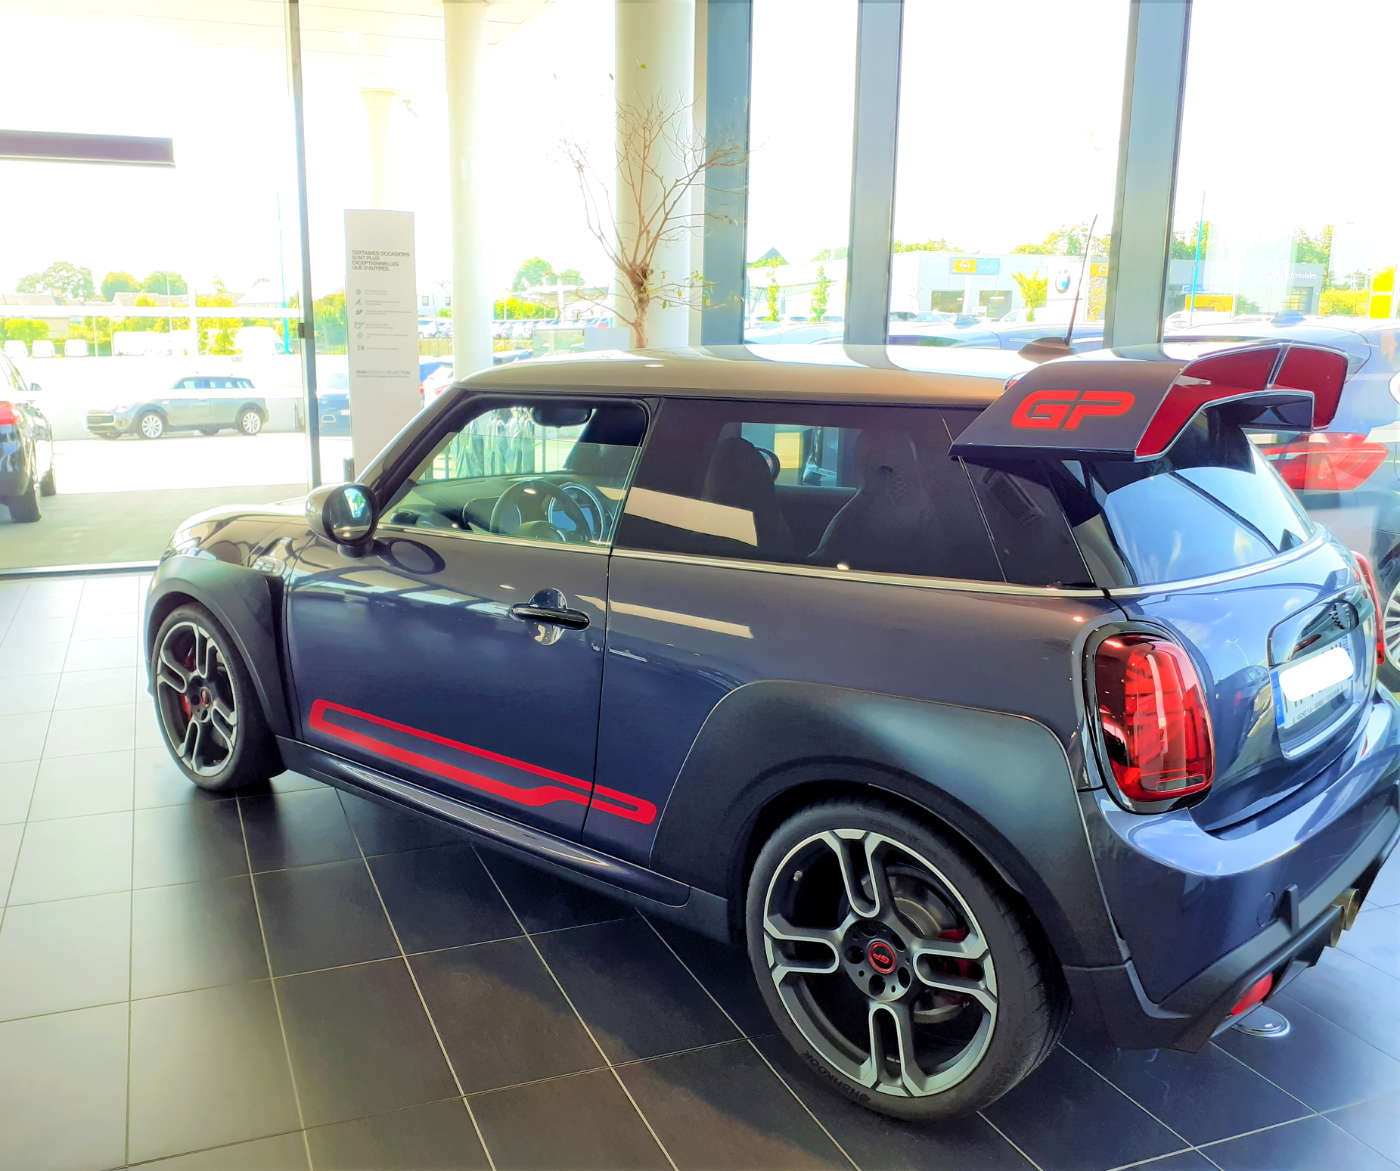 ACCESSOIRES JOHN COOPER WORKS - MINI Store Cannes, Antibes